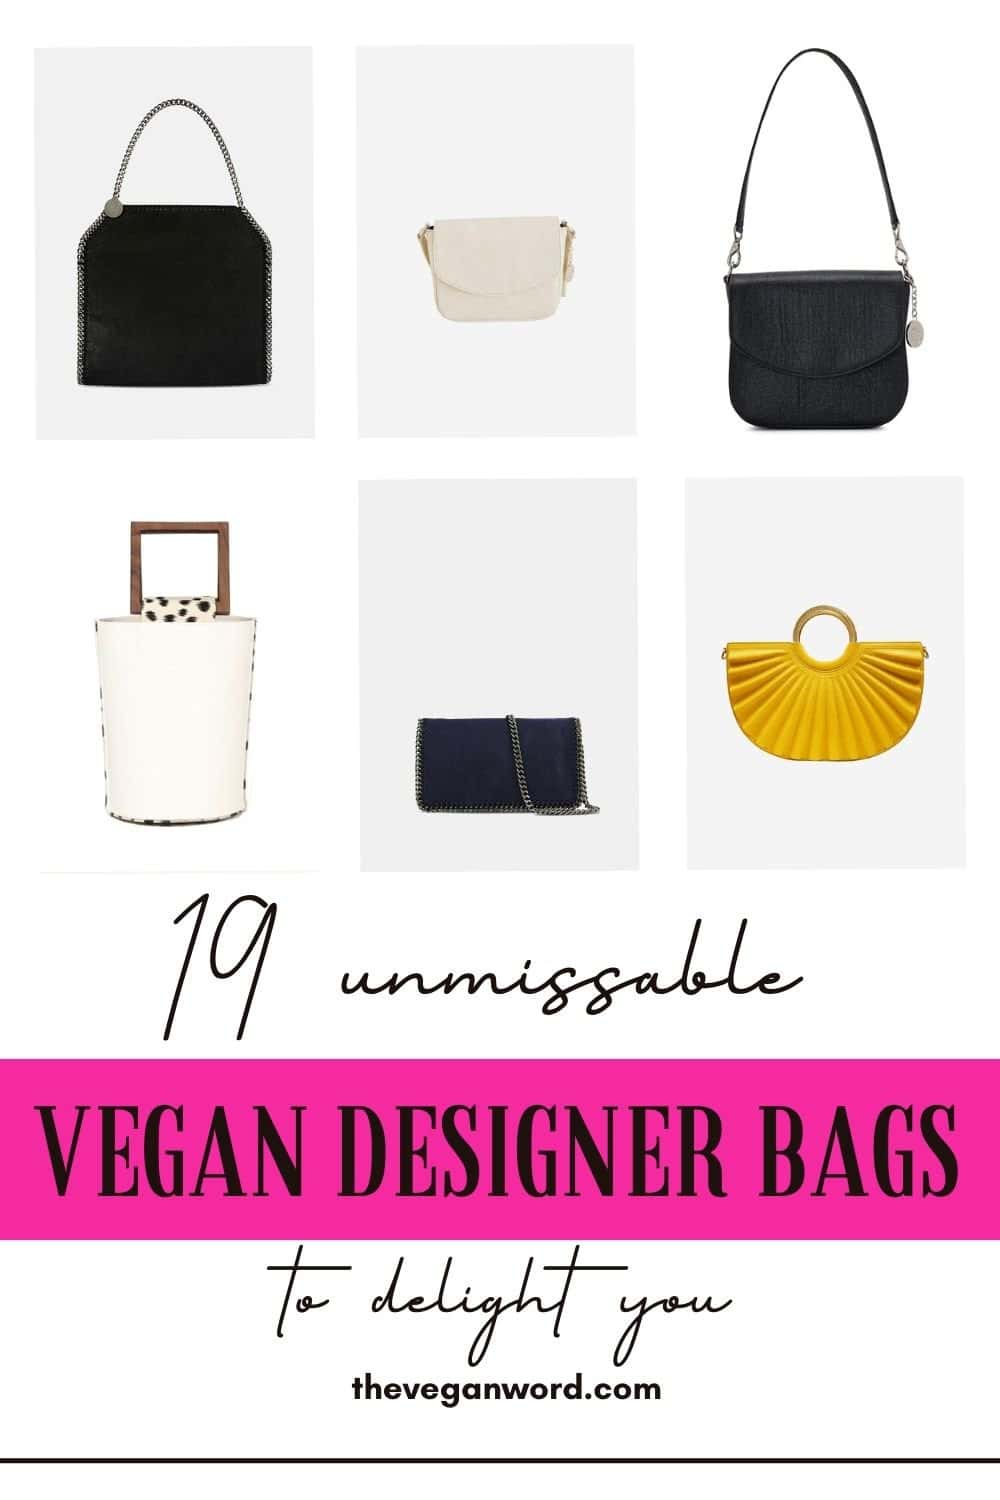 Pinterest image of different vegan designer bags with text that reads "19 unmissable vegan designer bags to delight you"